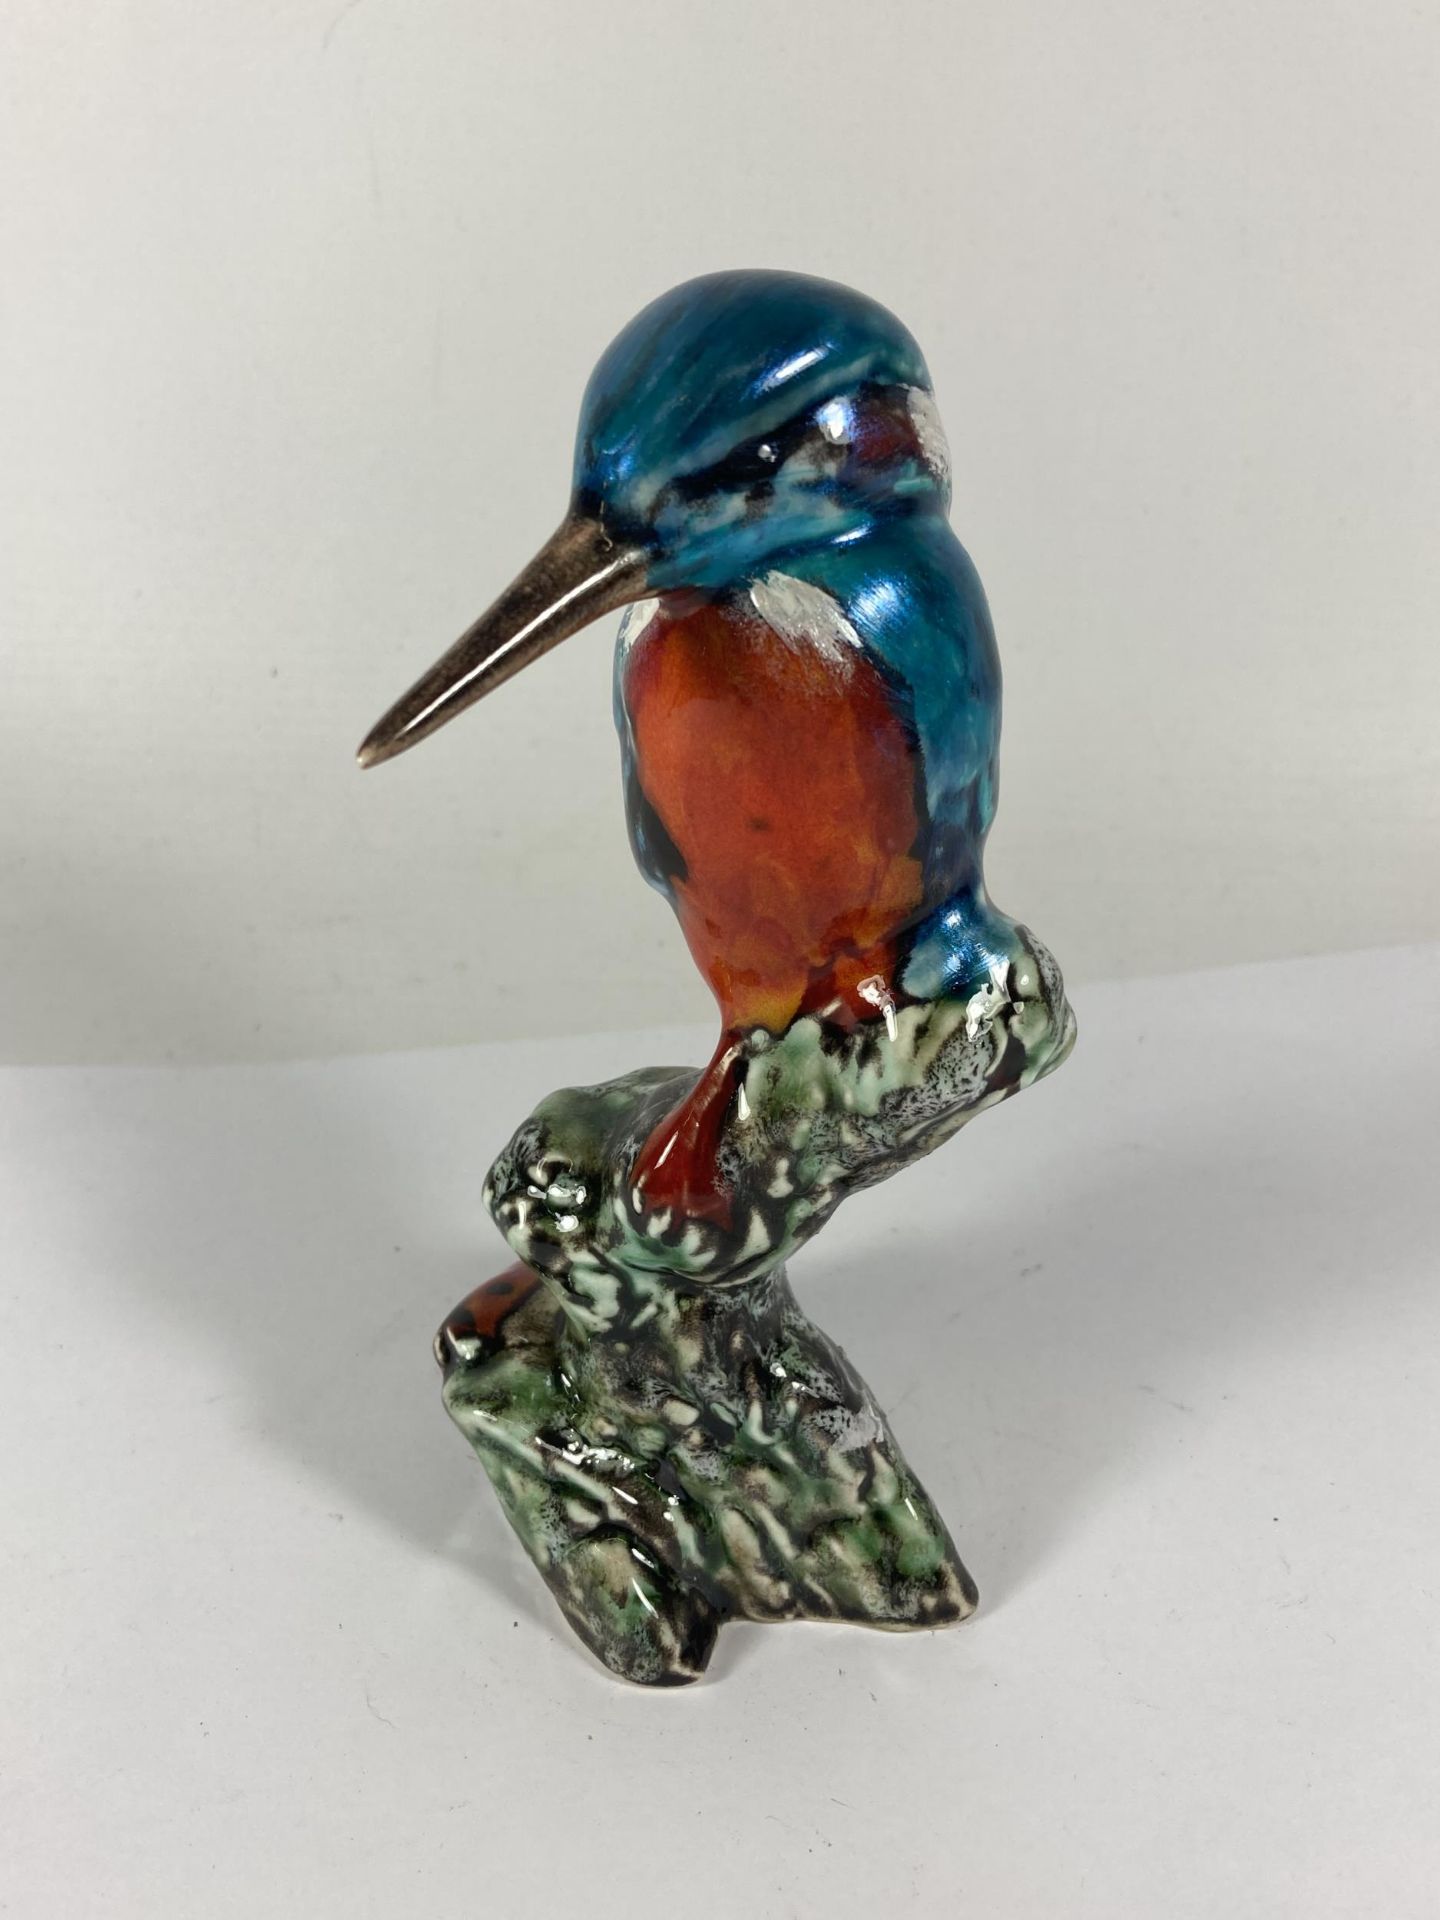 A HANDPAINTED AND SIGNED IN GOLD ANITA HARRIS KINGFISHER FIGURE